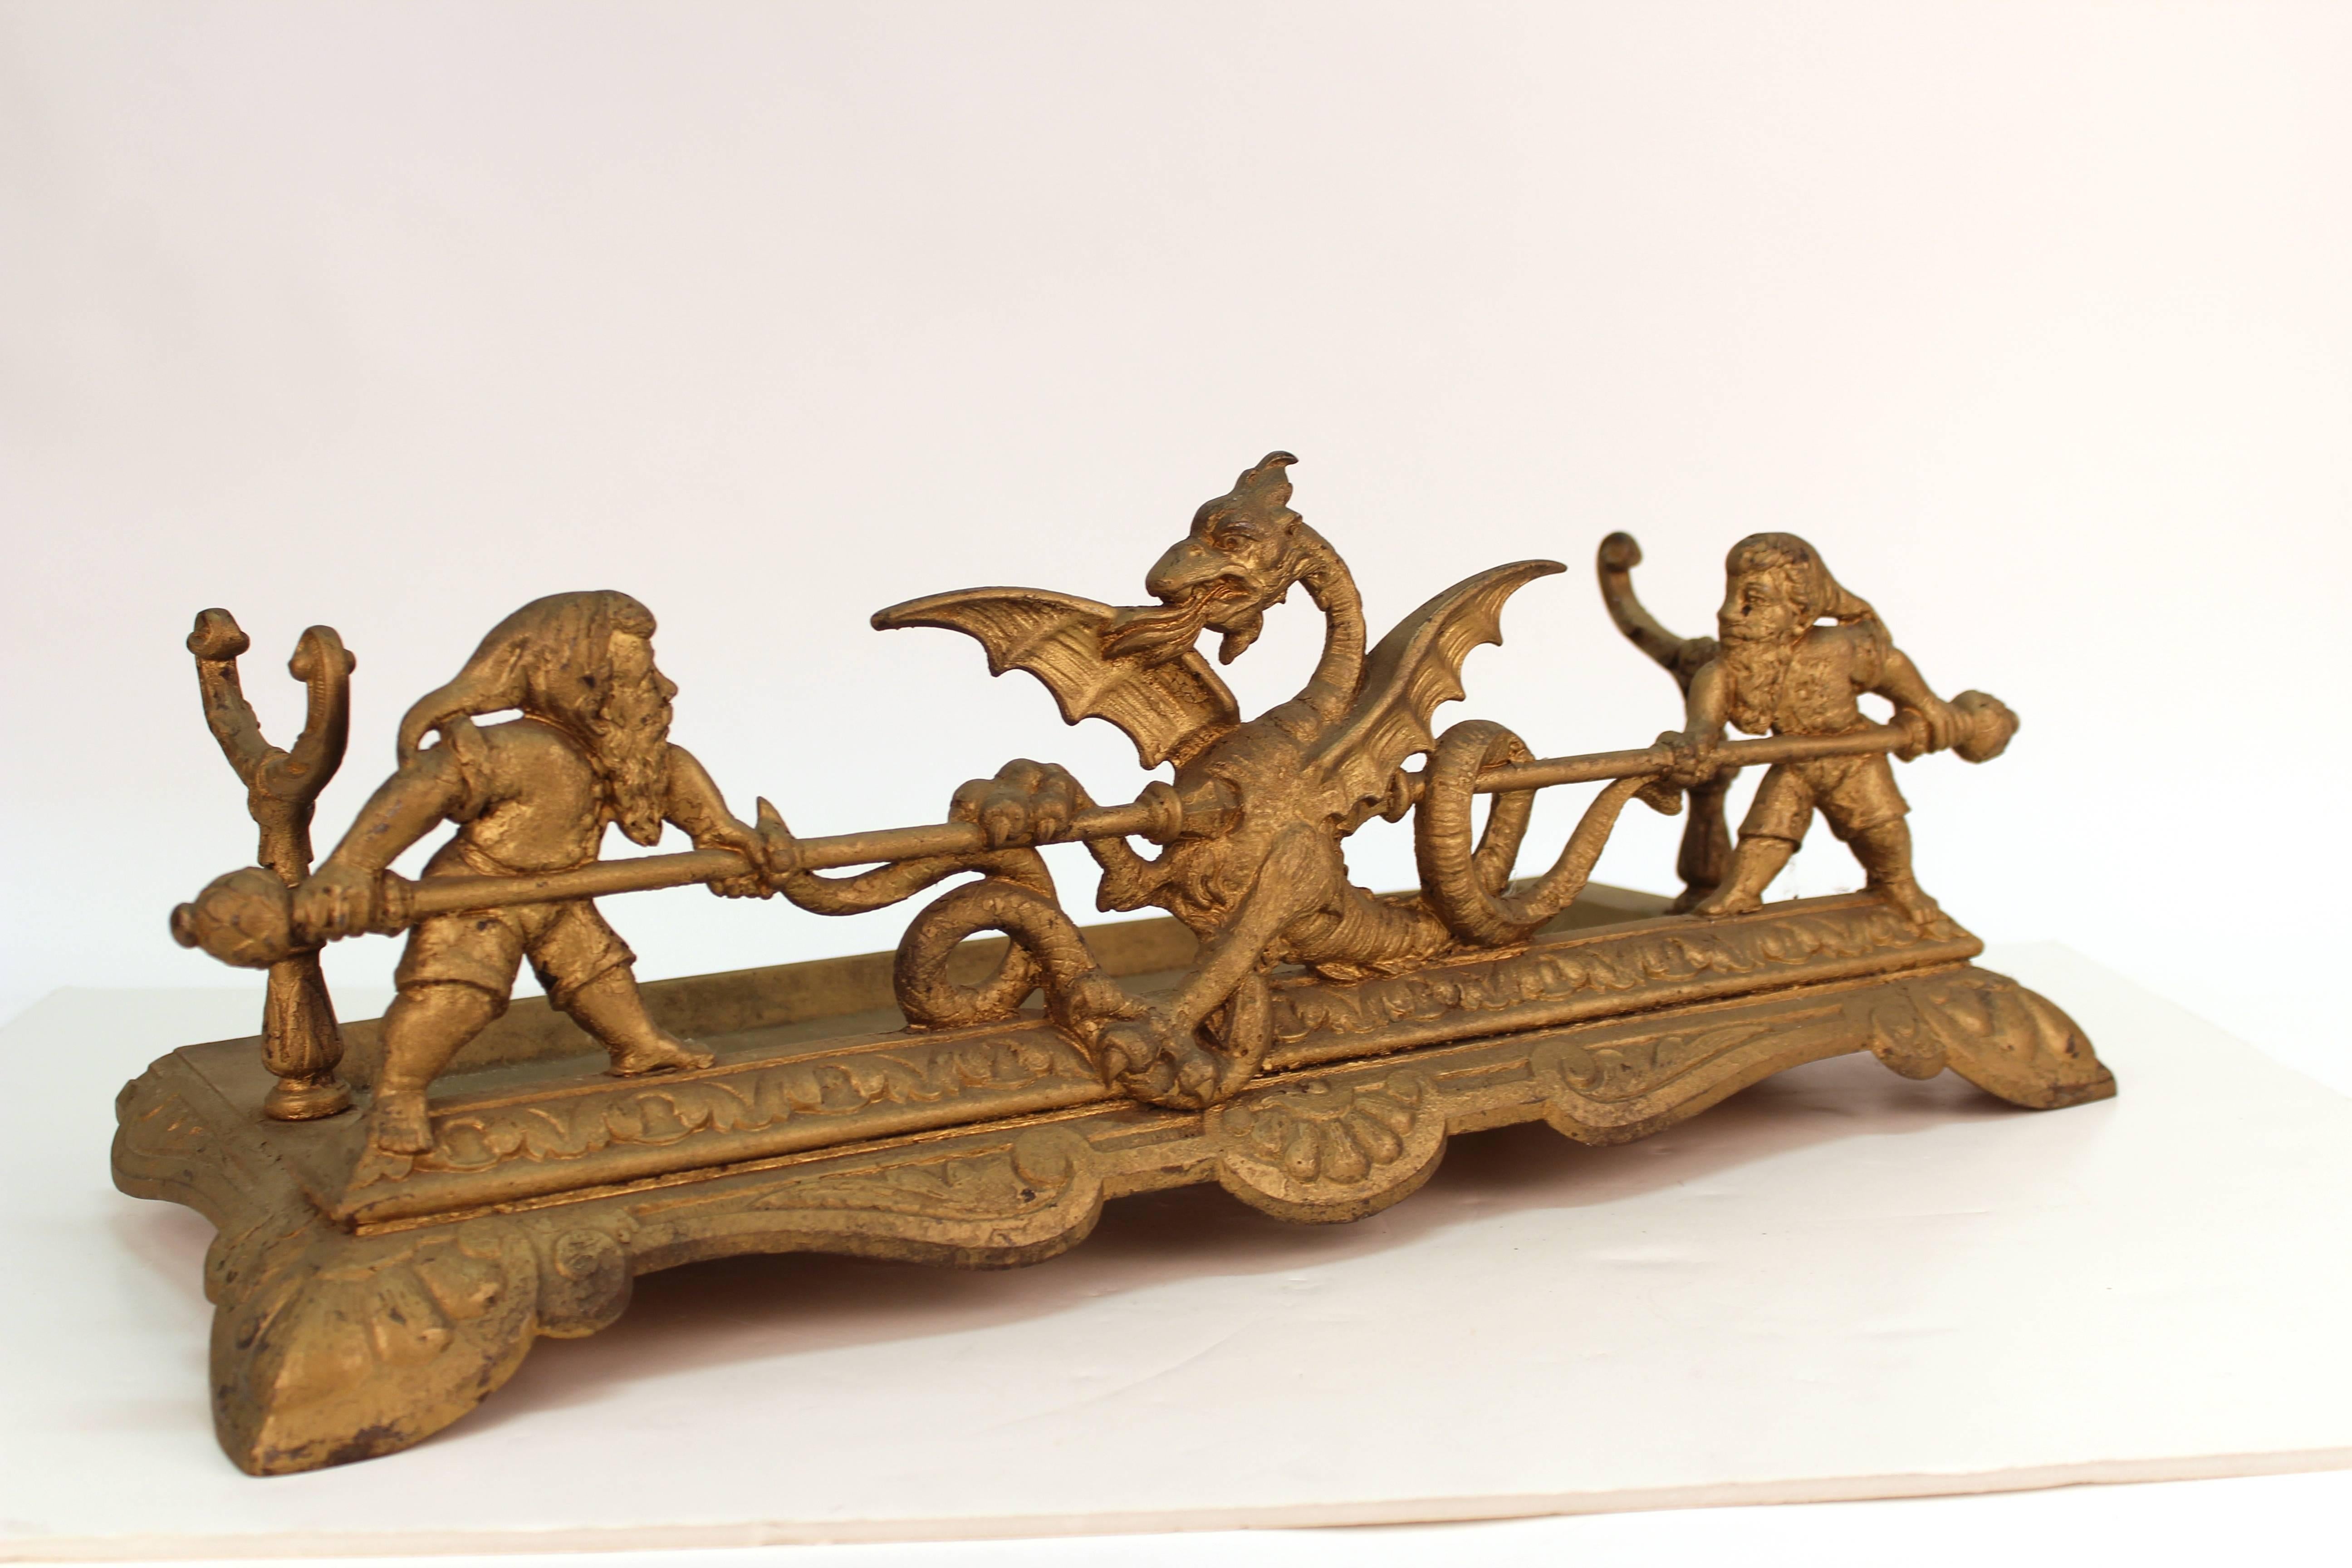 An American Victorian iron fireplace tool cradle with gnome and dragon details. In gold gilt finish. Made in the 1880s-1890s in the United States. In great vintage condition.